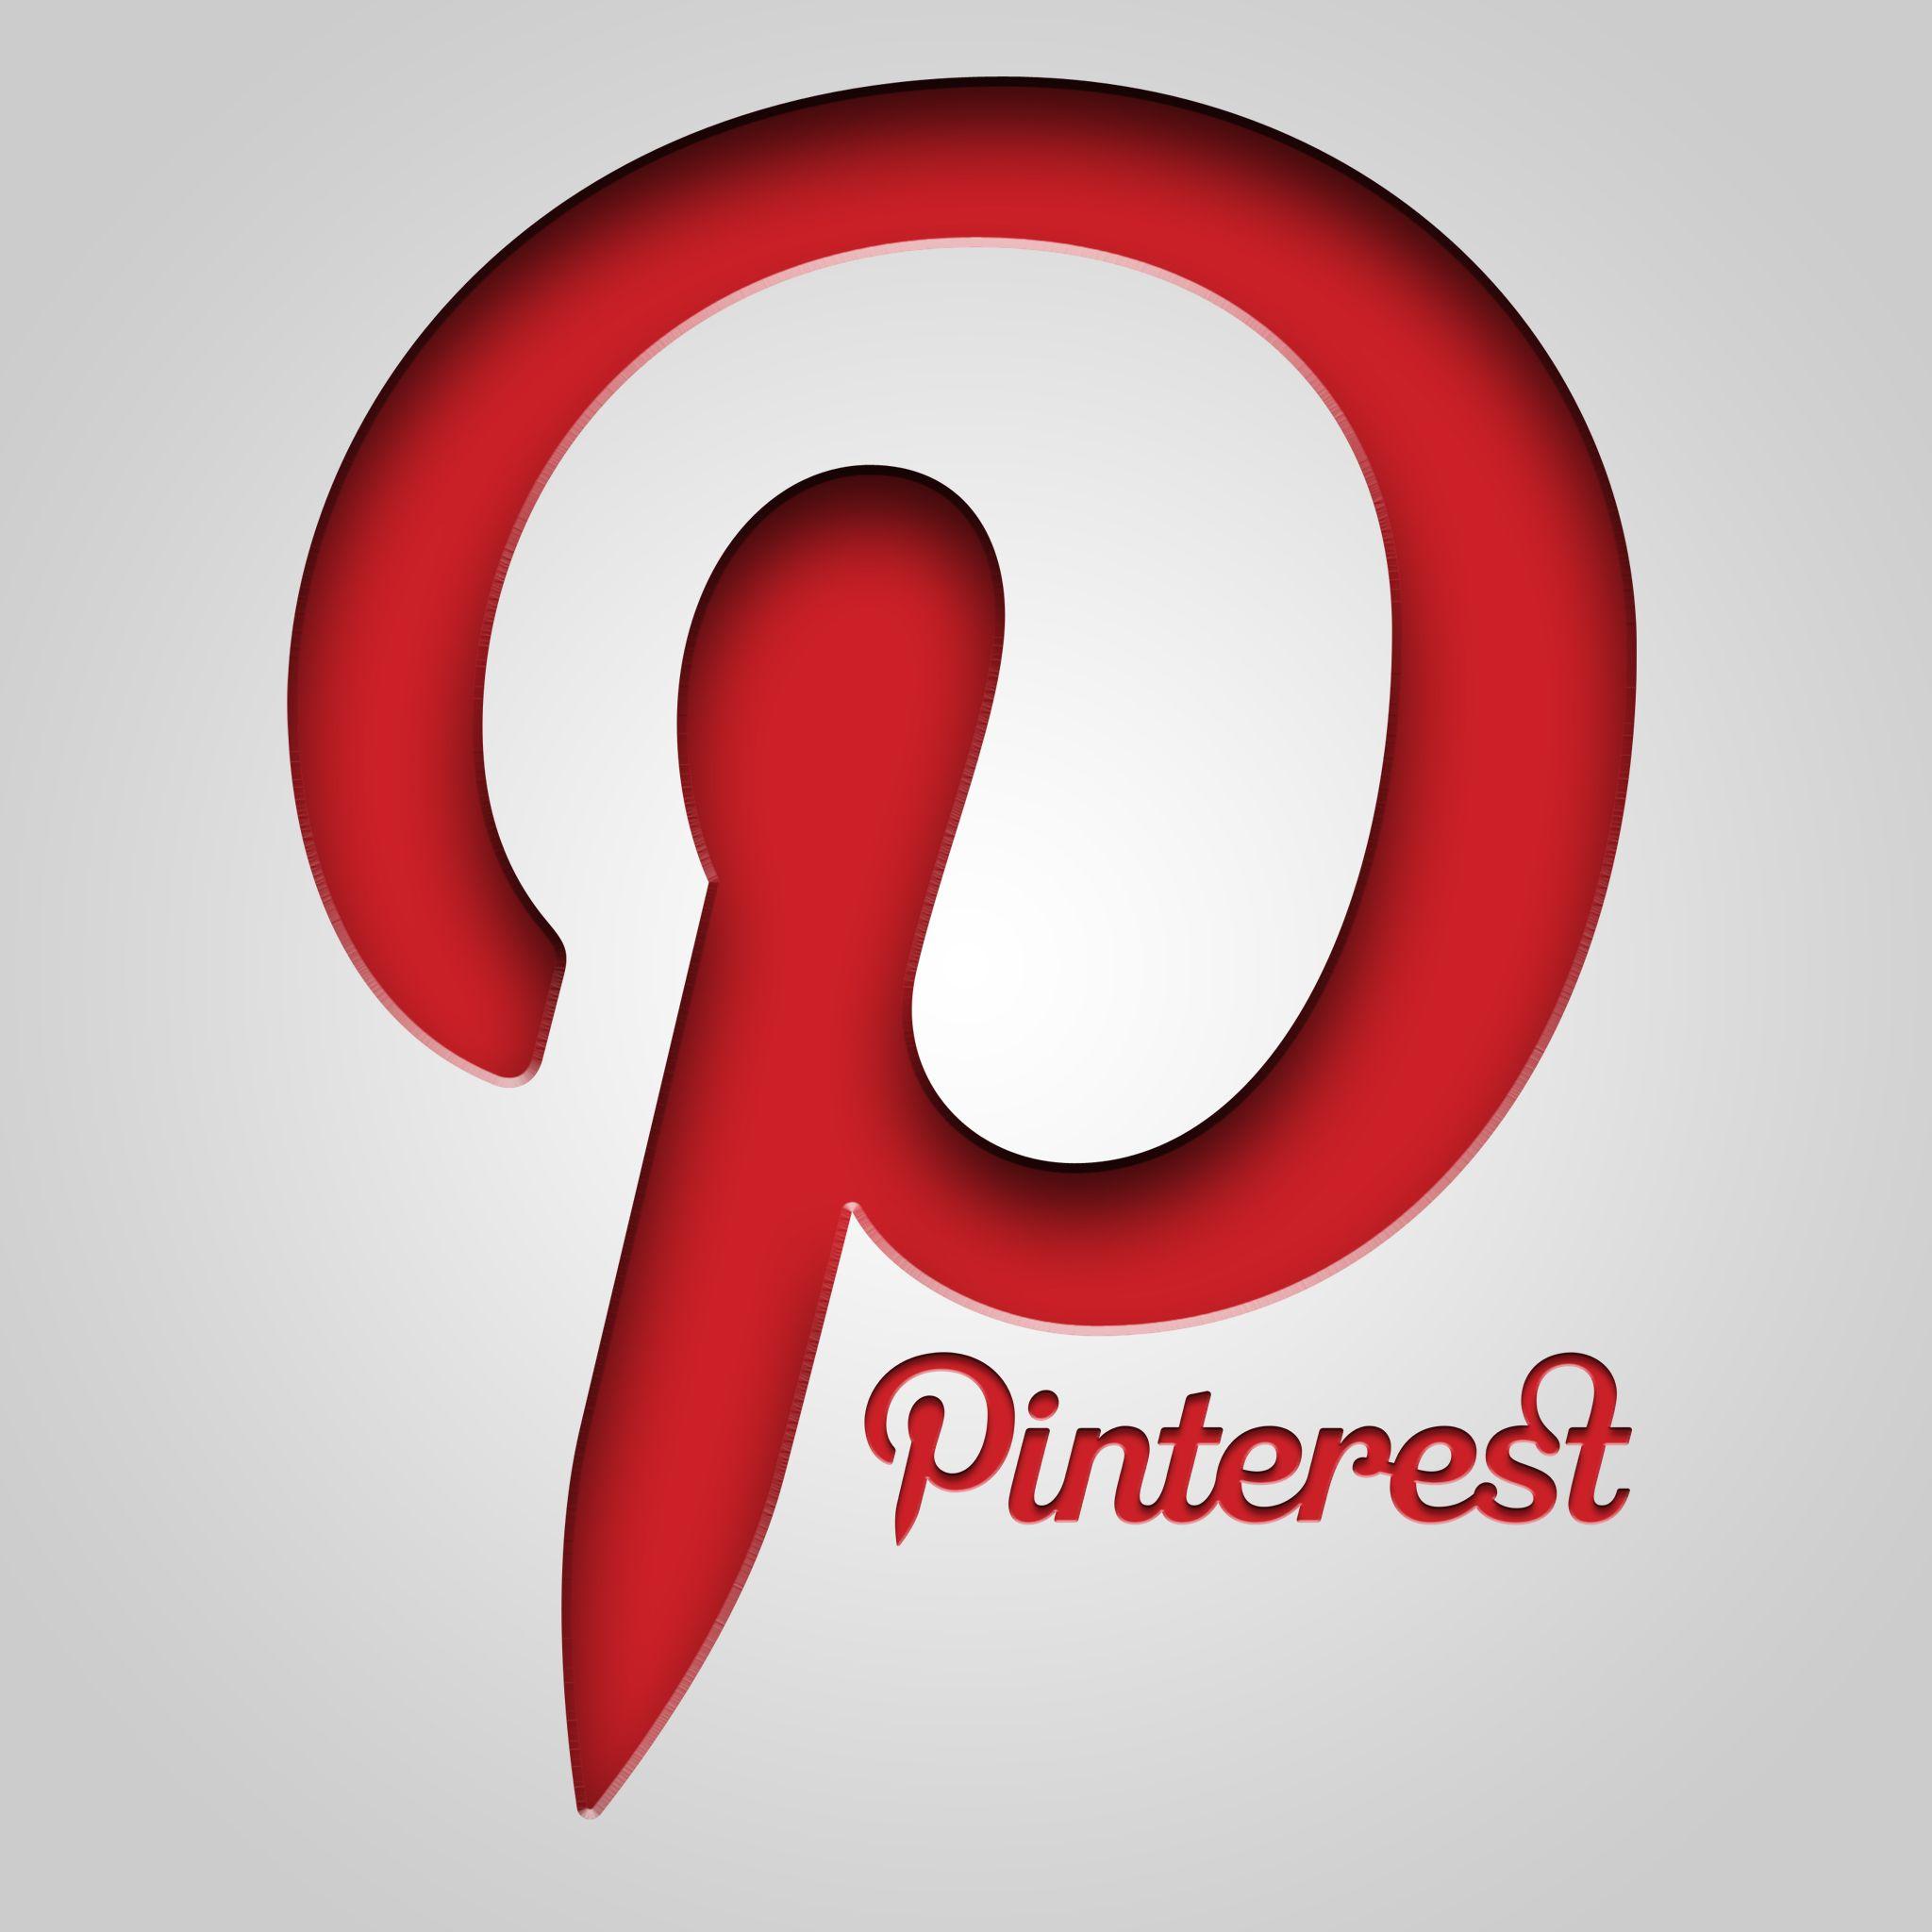 Pinetrest Logo - Why your business can't go another day without Pinterest?